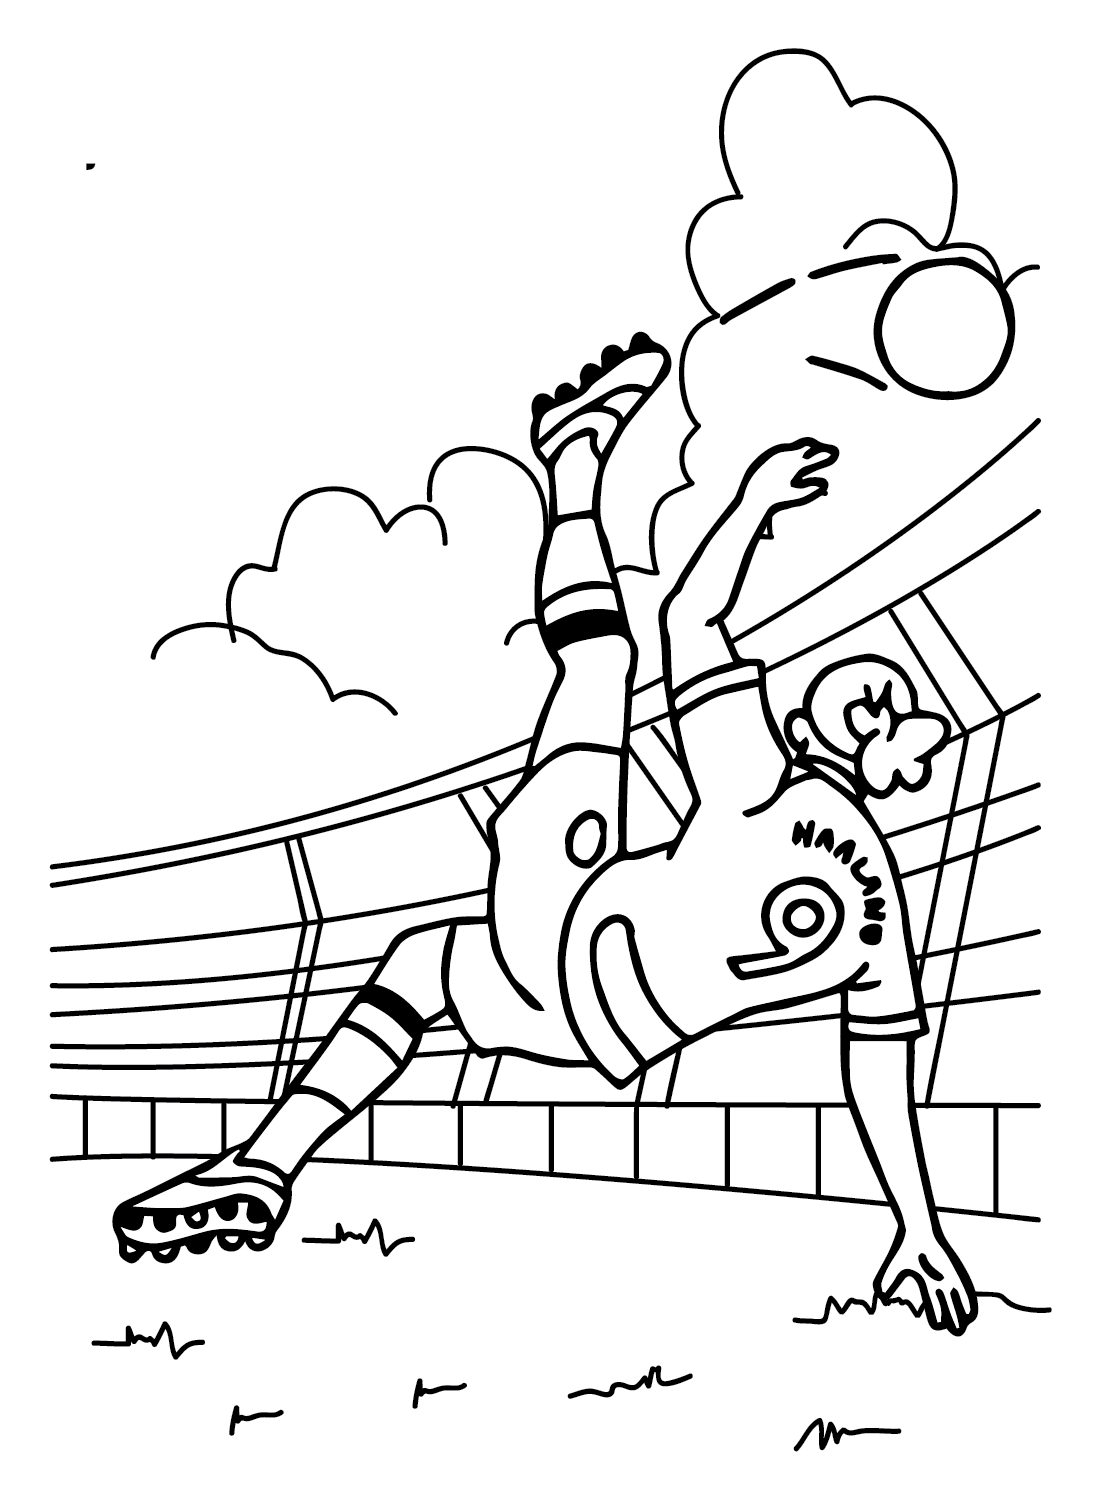 Erling Haaland World Cup Coloring Page